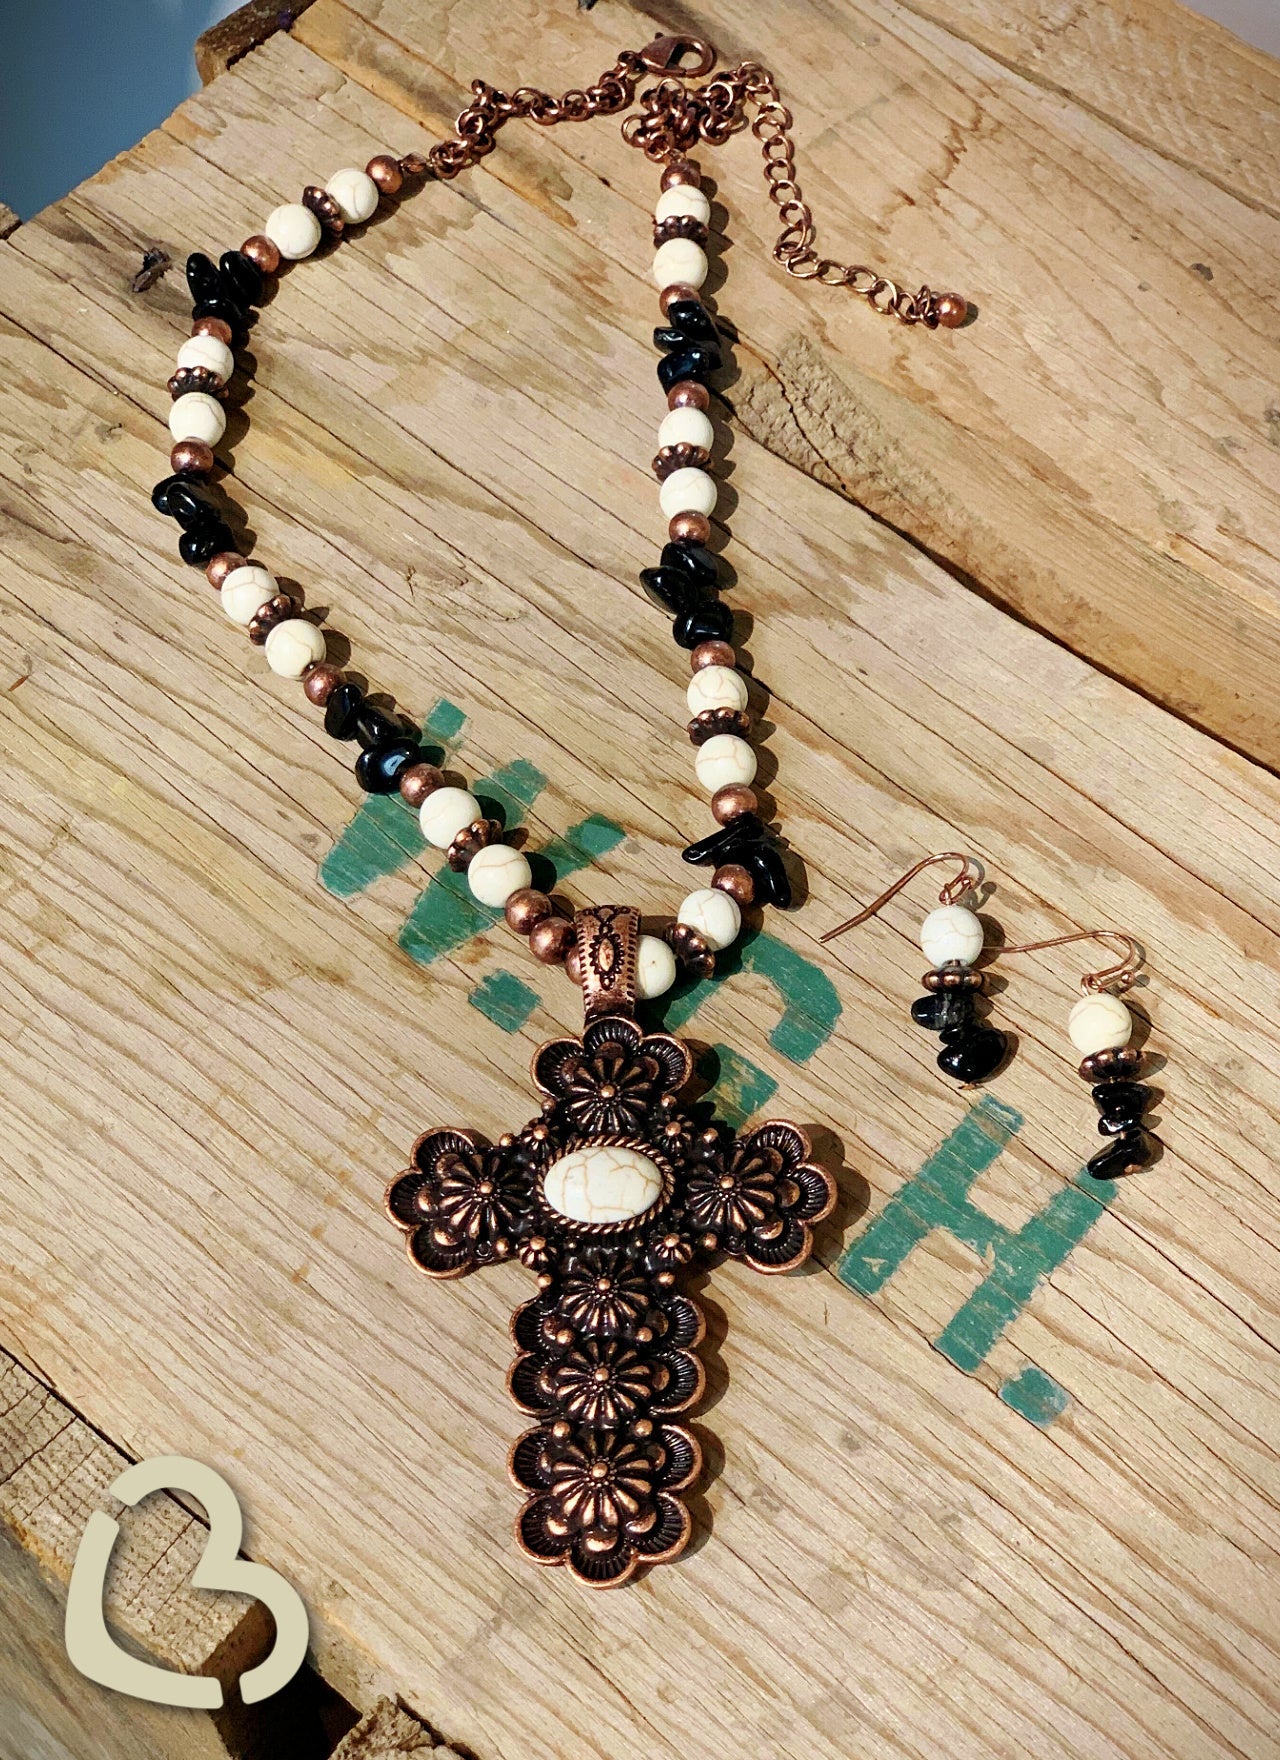 The Bethel Springs Cross Necklace Jewelry 19 